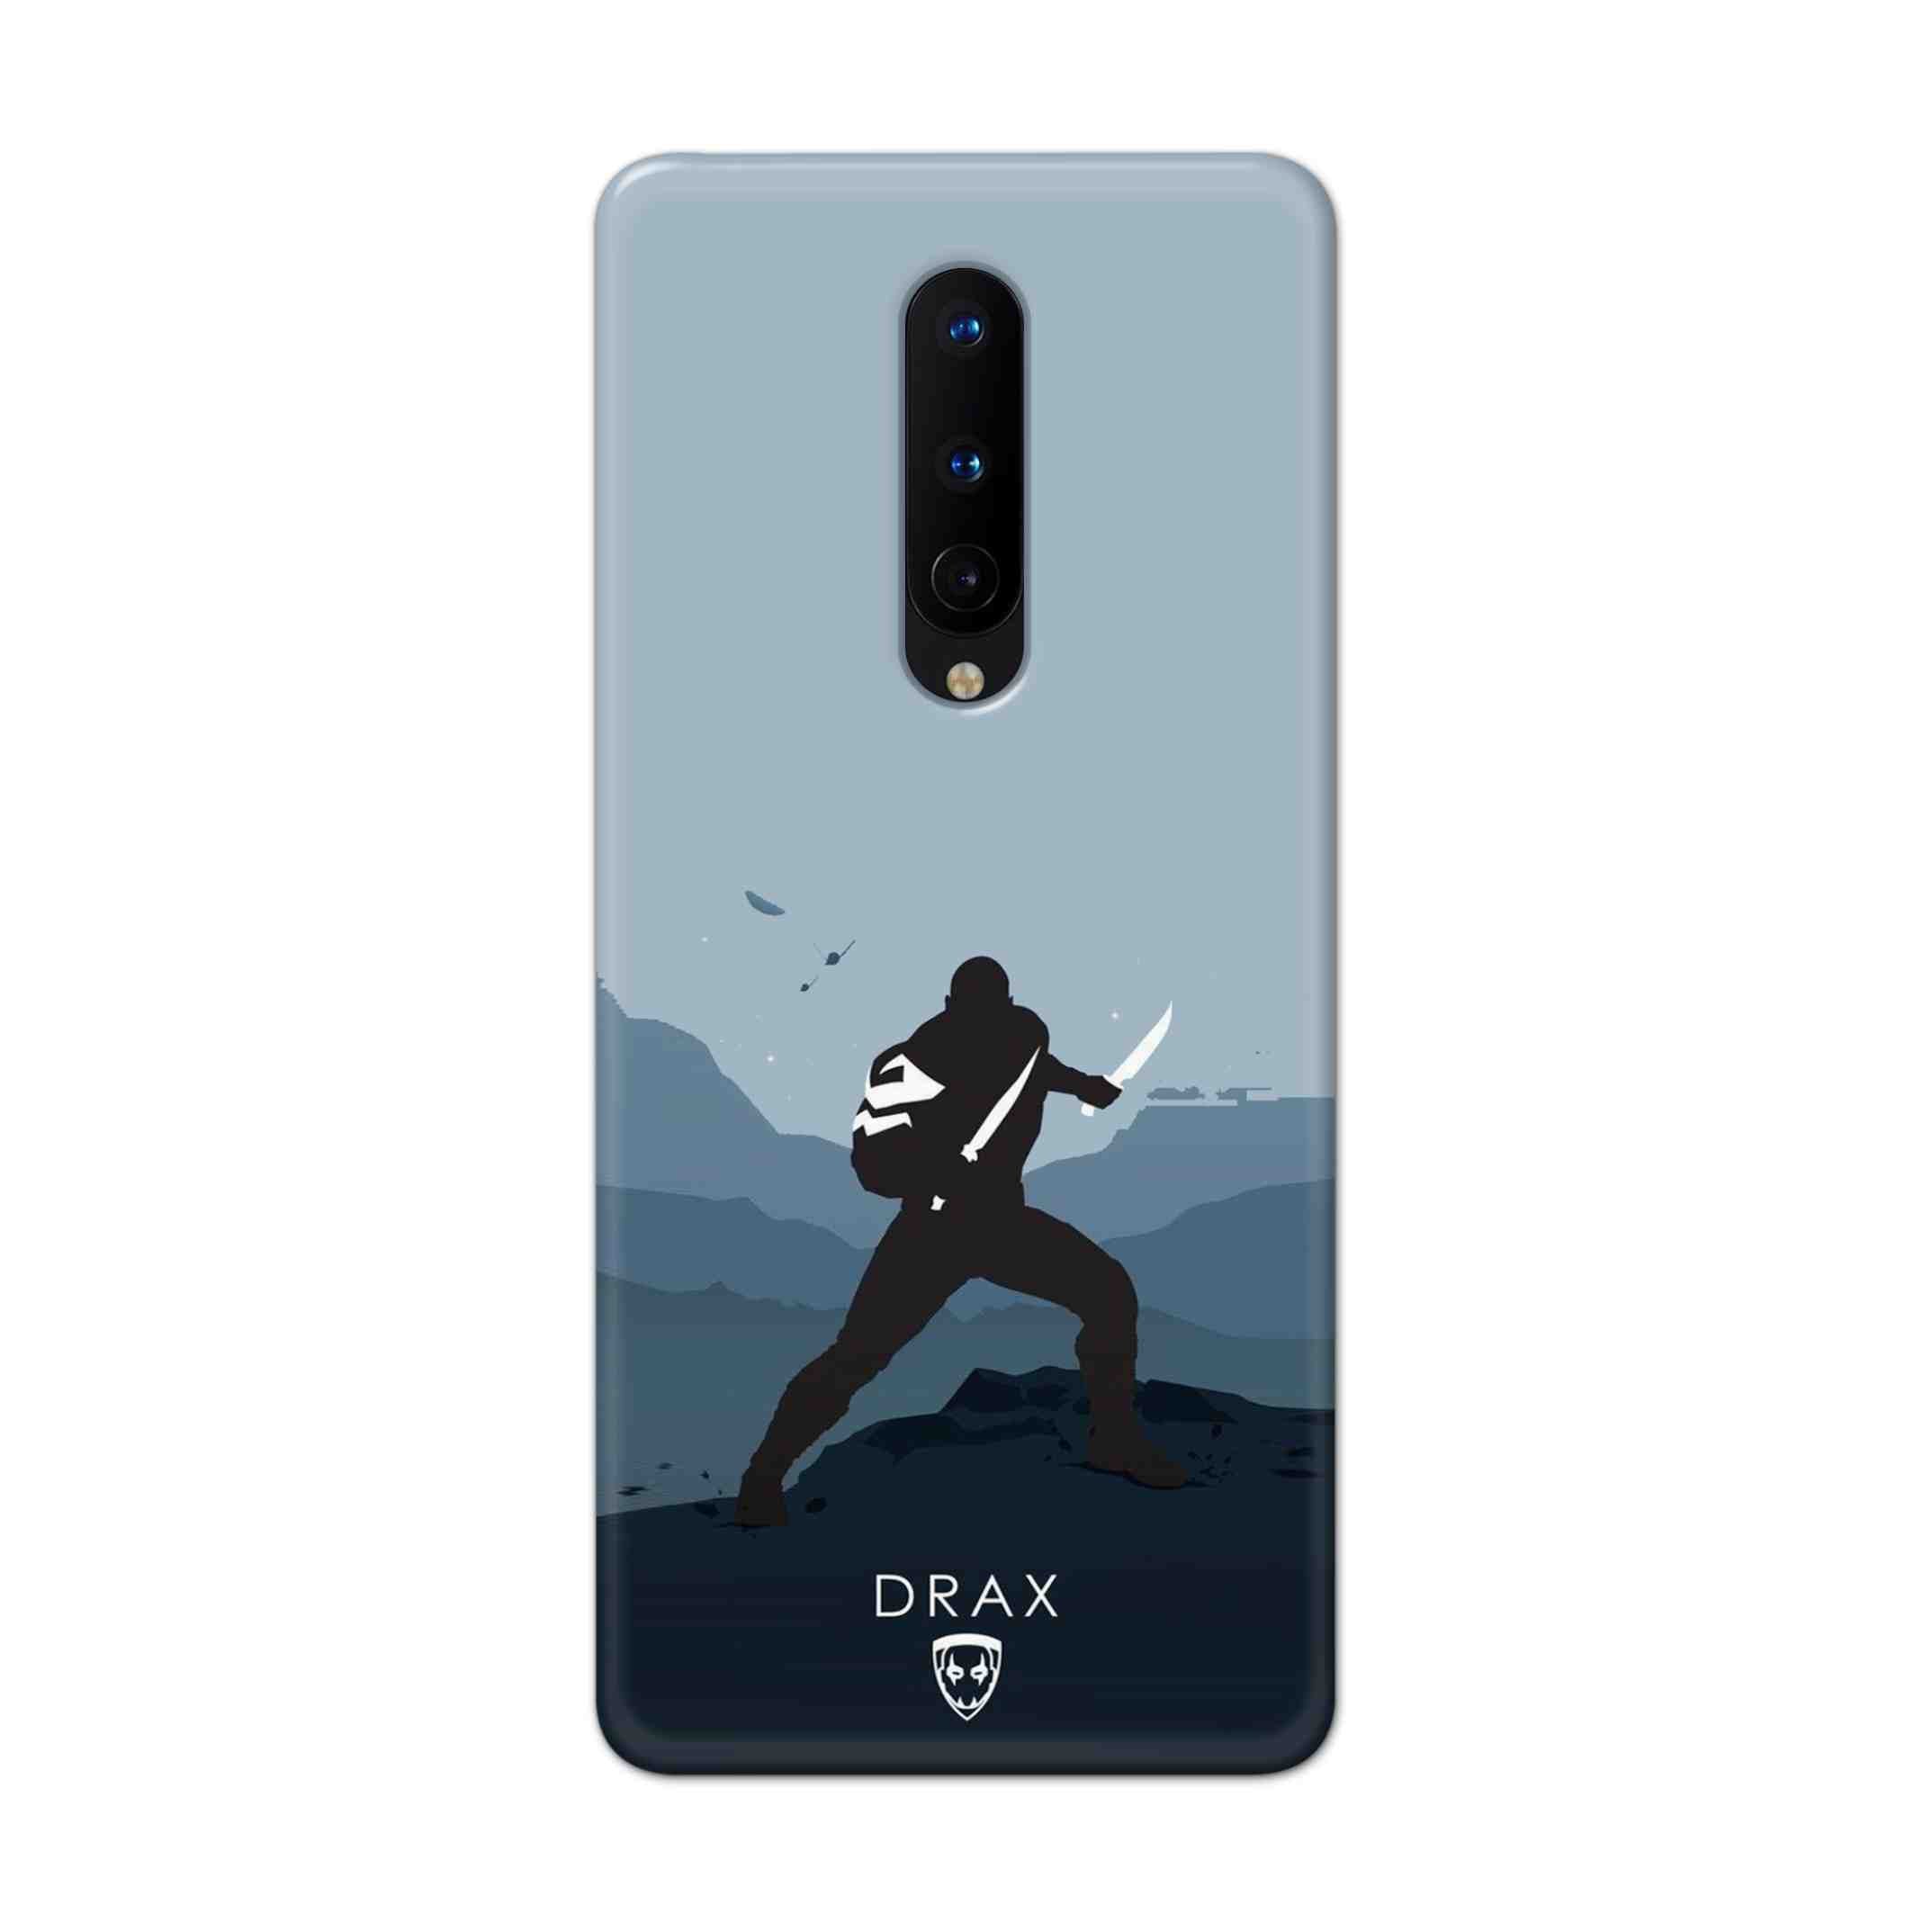 Buy Drax Hard Back Mobile Phone Case Cover For OnePlus 8 Online